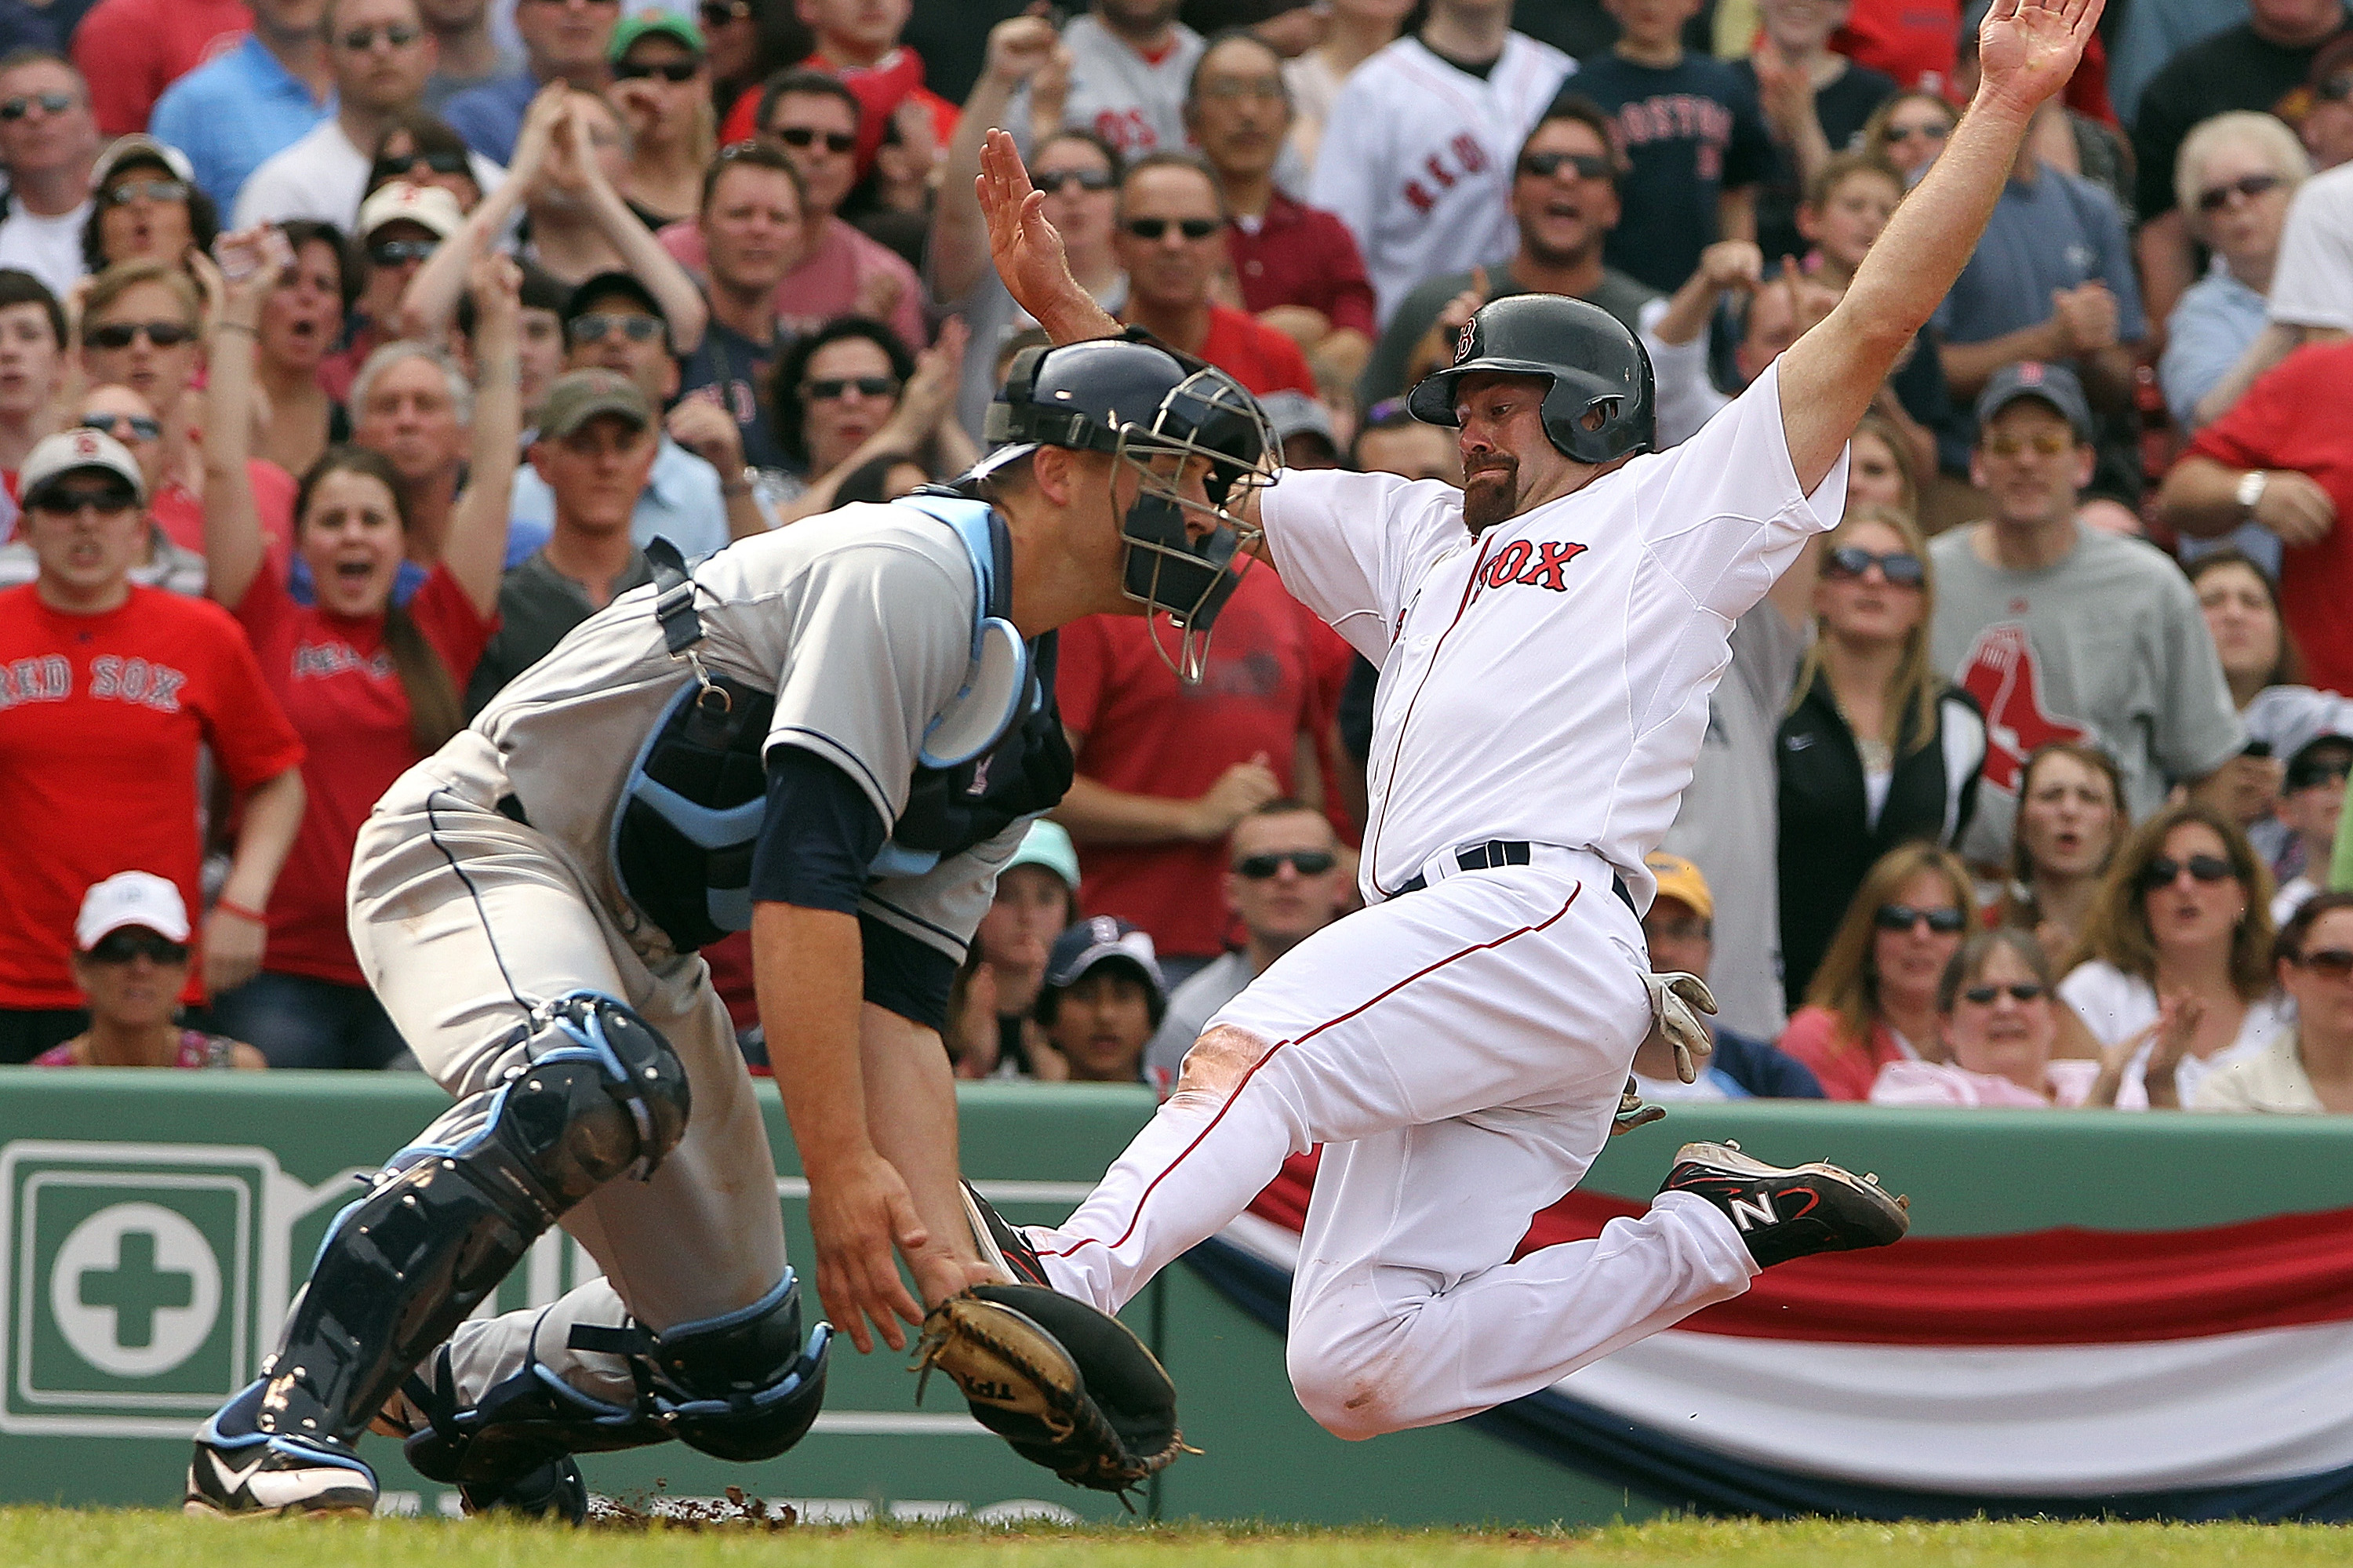 Kevin Youkilis marked the anniversary of an unforgettable Red Sox moment